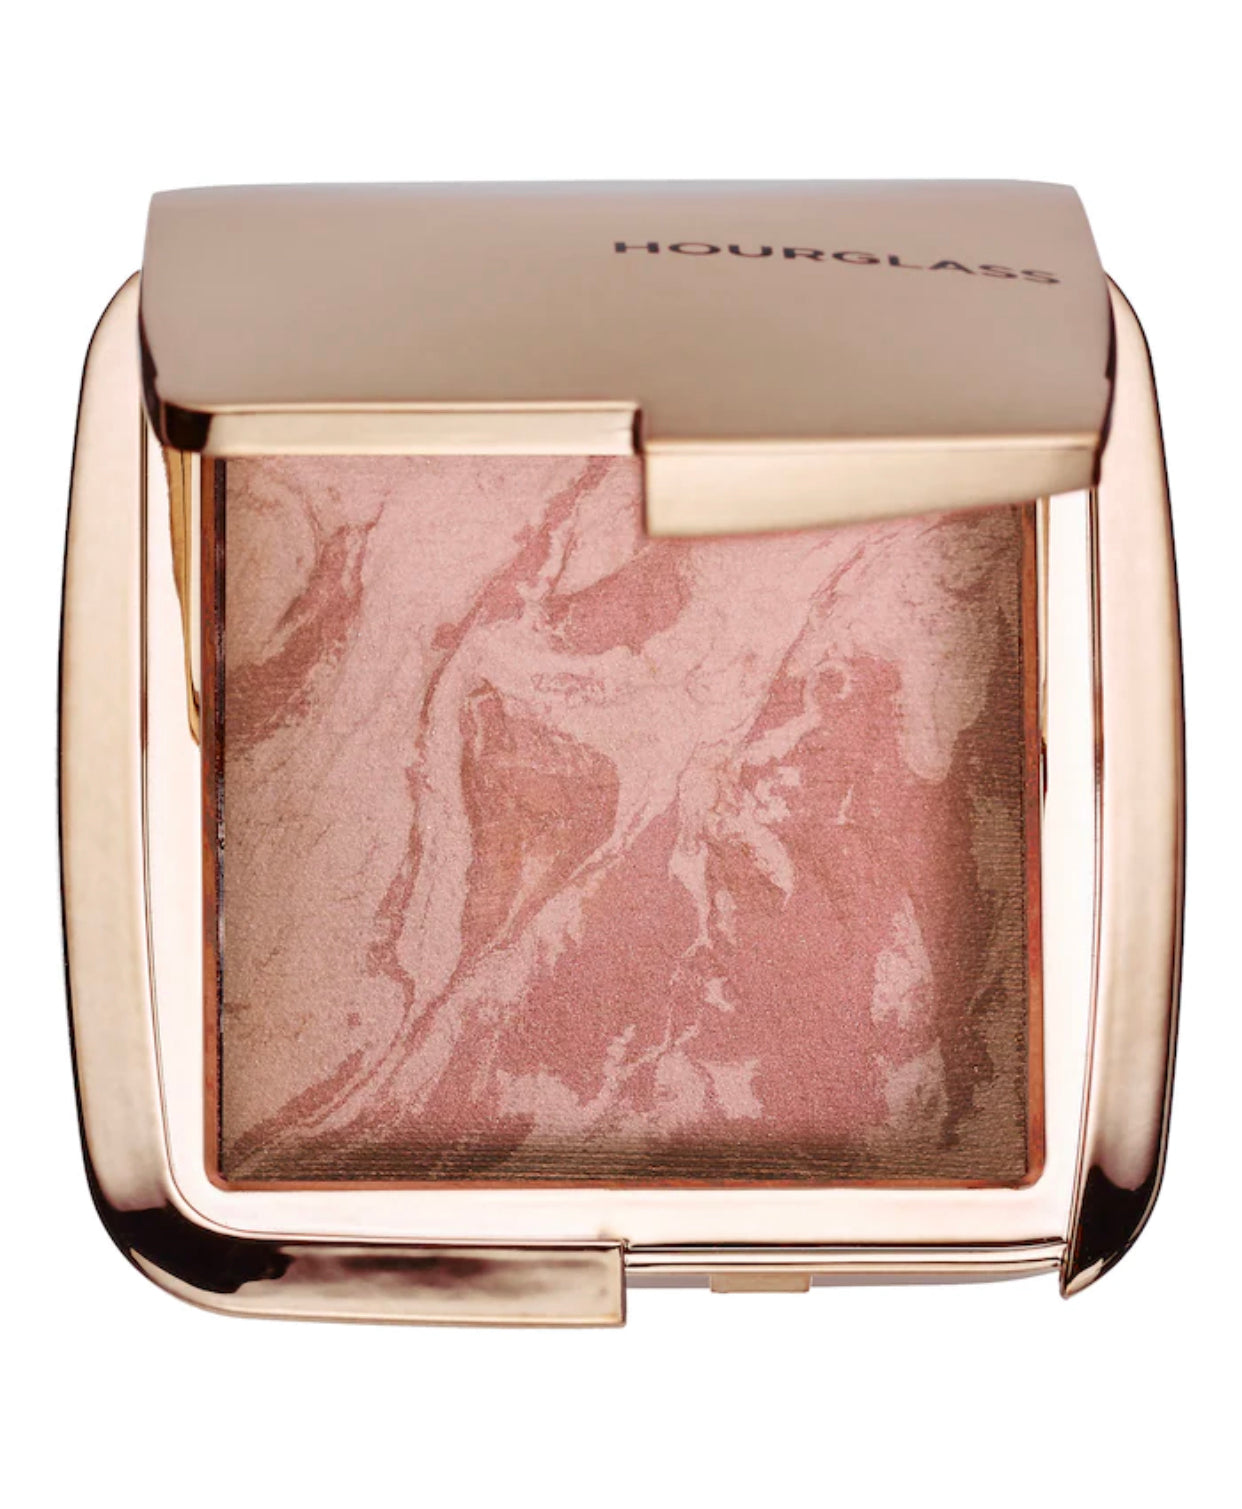 HOURGLASS, AMBIENT LIGHTING BLUSH COLLECTION